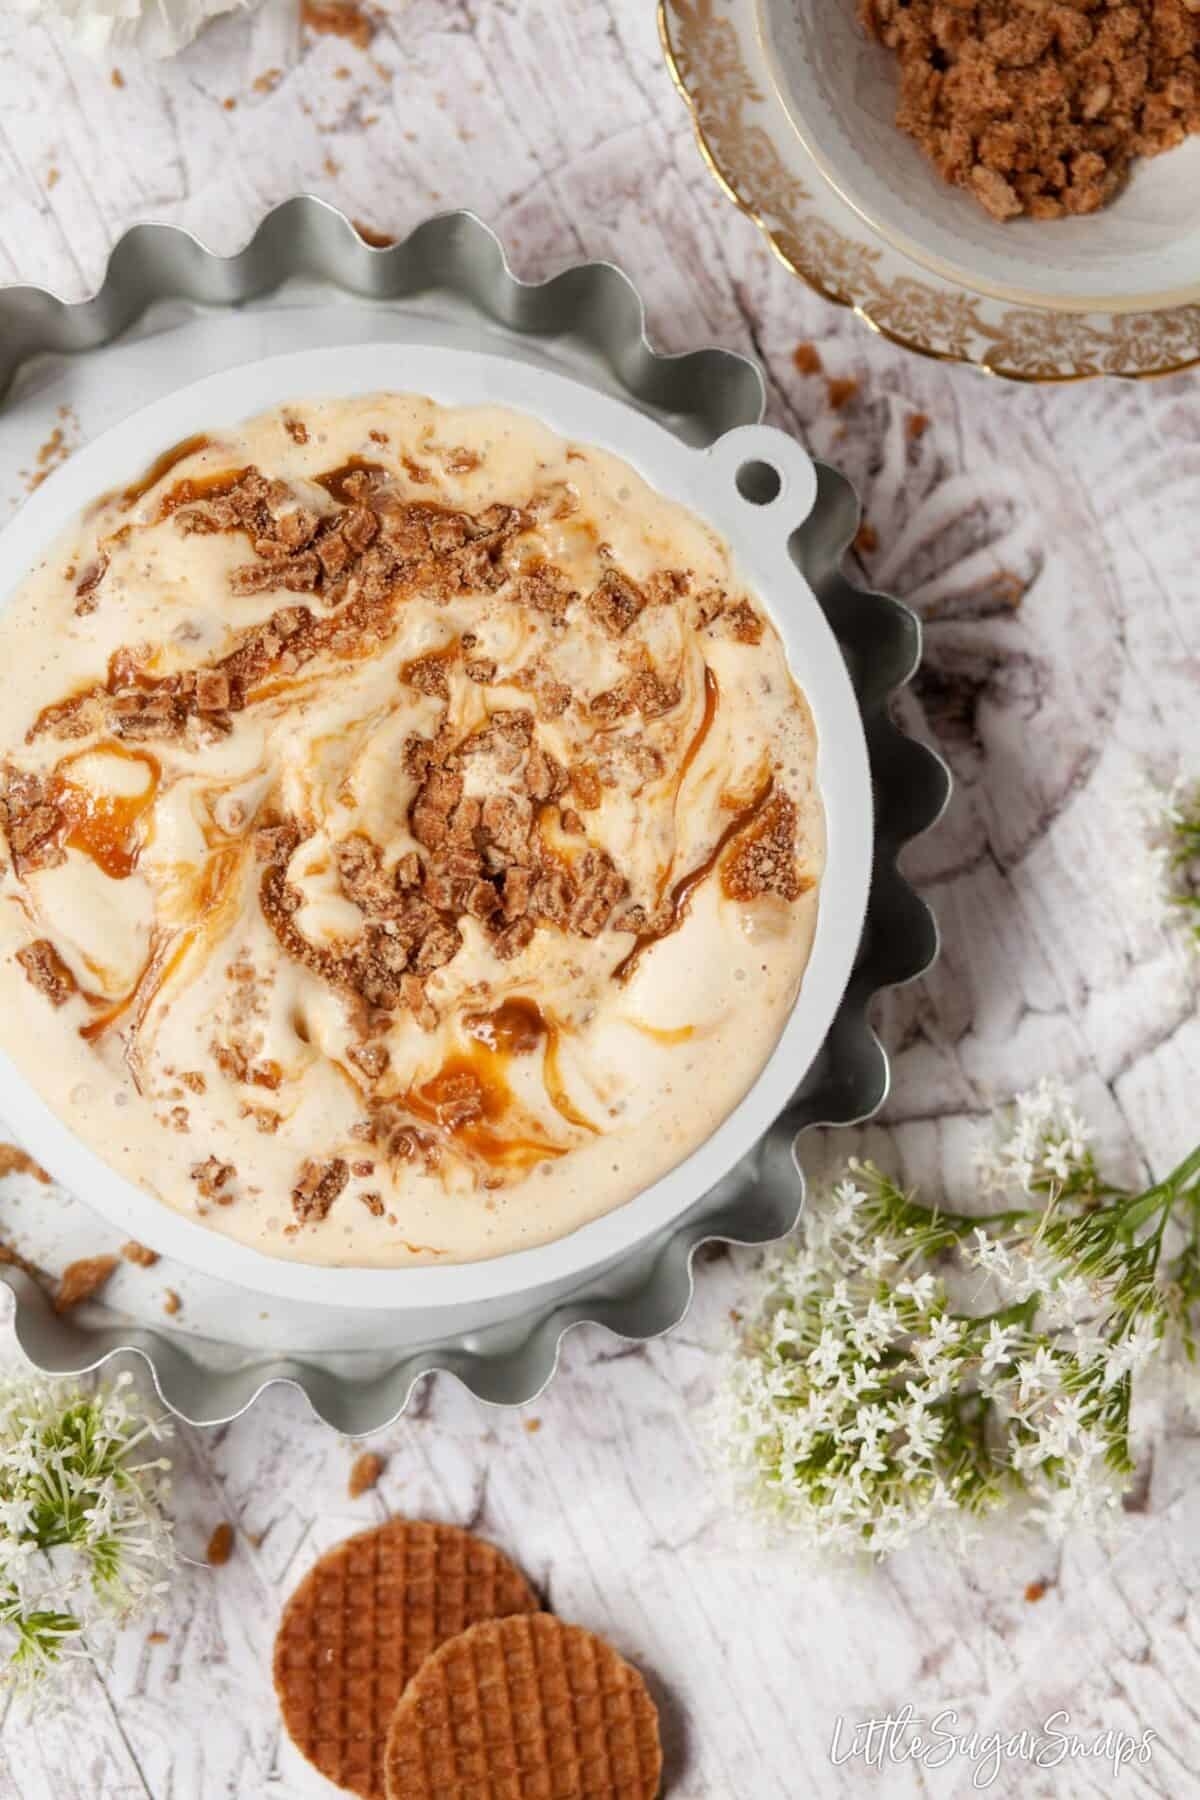 Ice Cream with swirls of caramel and cookie crumbles in a dish next to flowers and cookies.